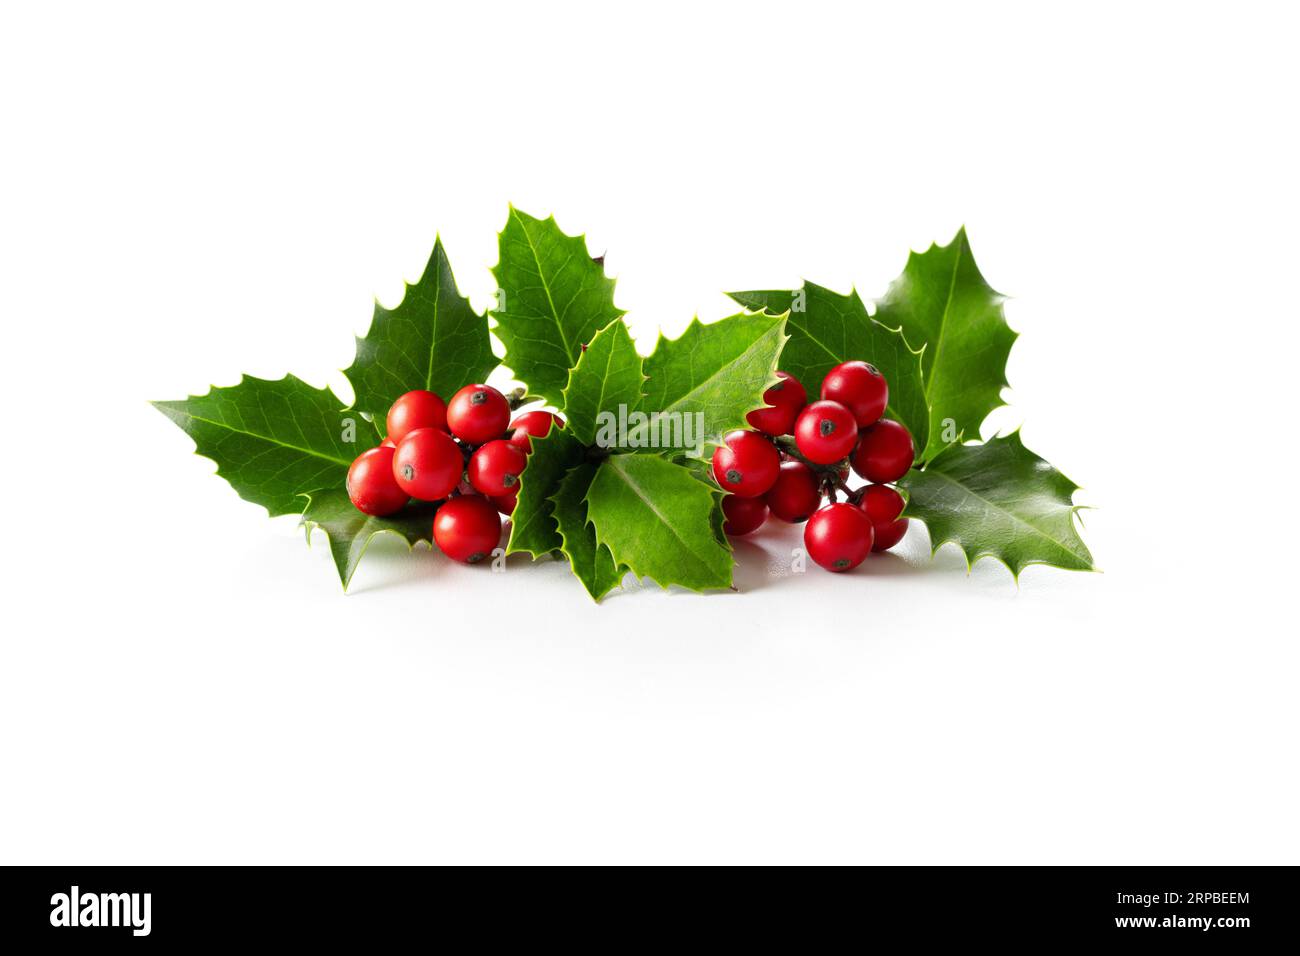 Natural Christmas decoration. Holly leaves with red berries on white. Stock Photo